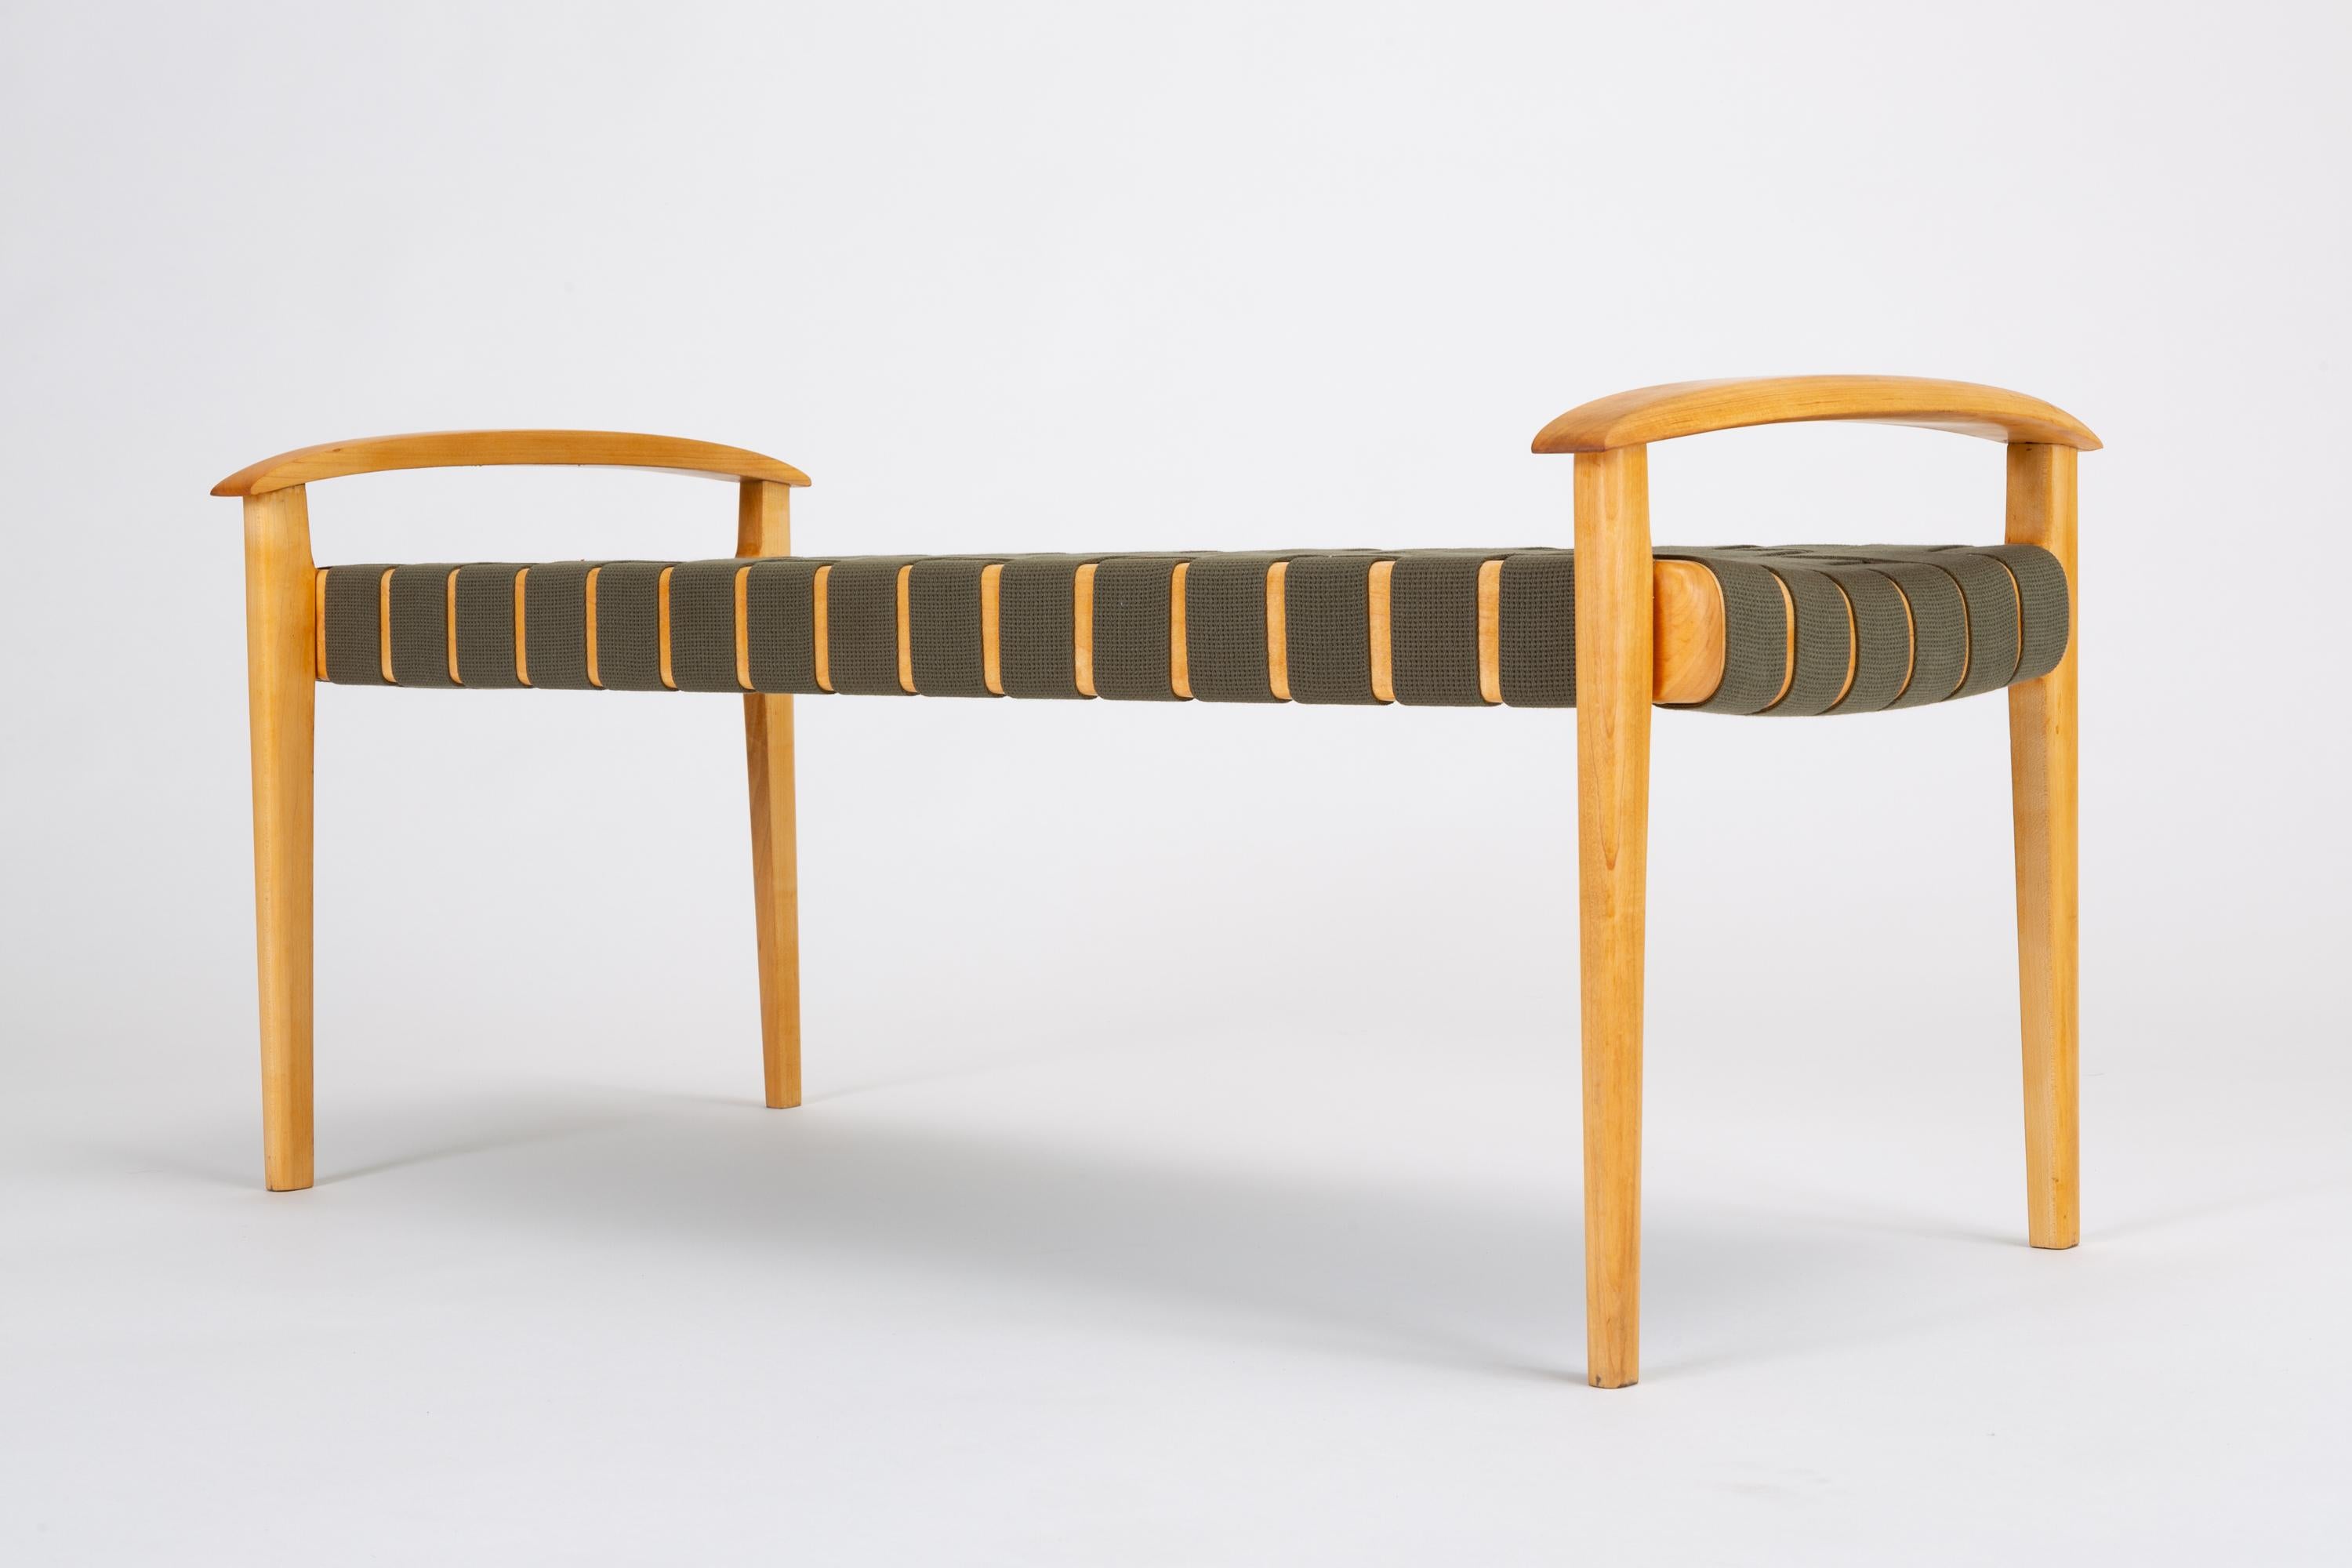 American-Made Maple Bench with Woven Seat by Tom Ghilarducci 1